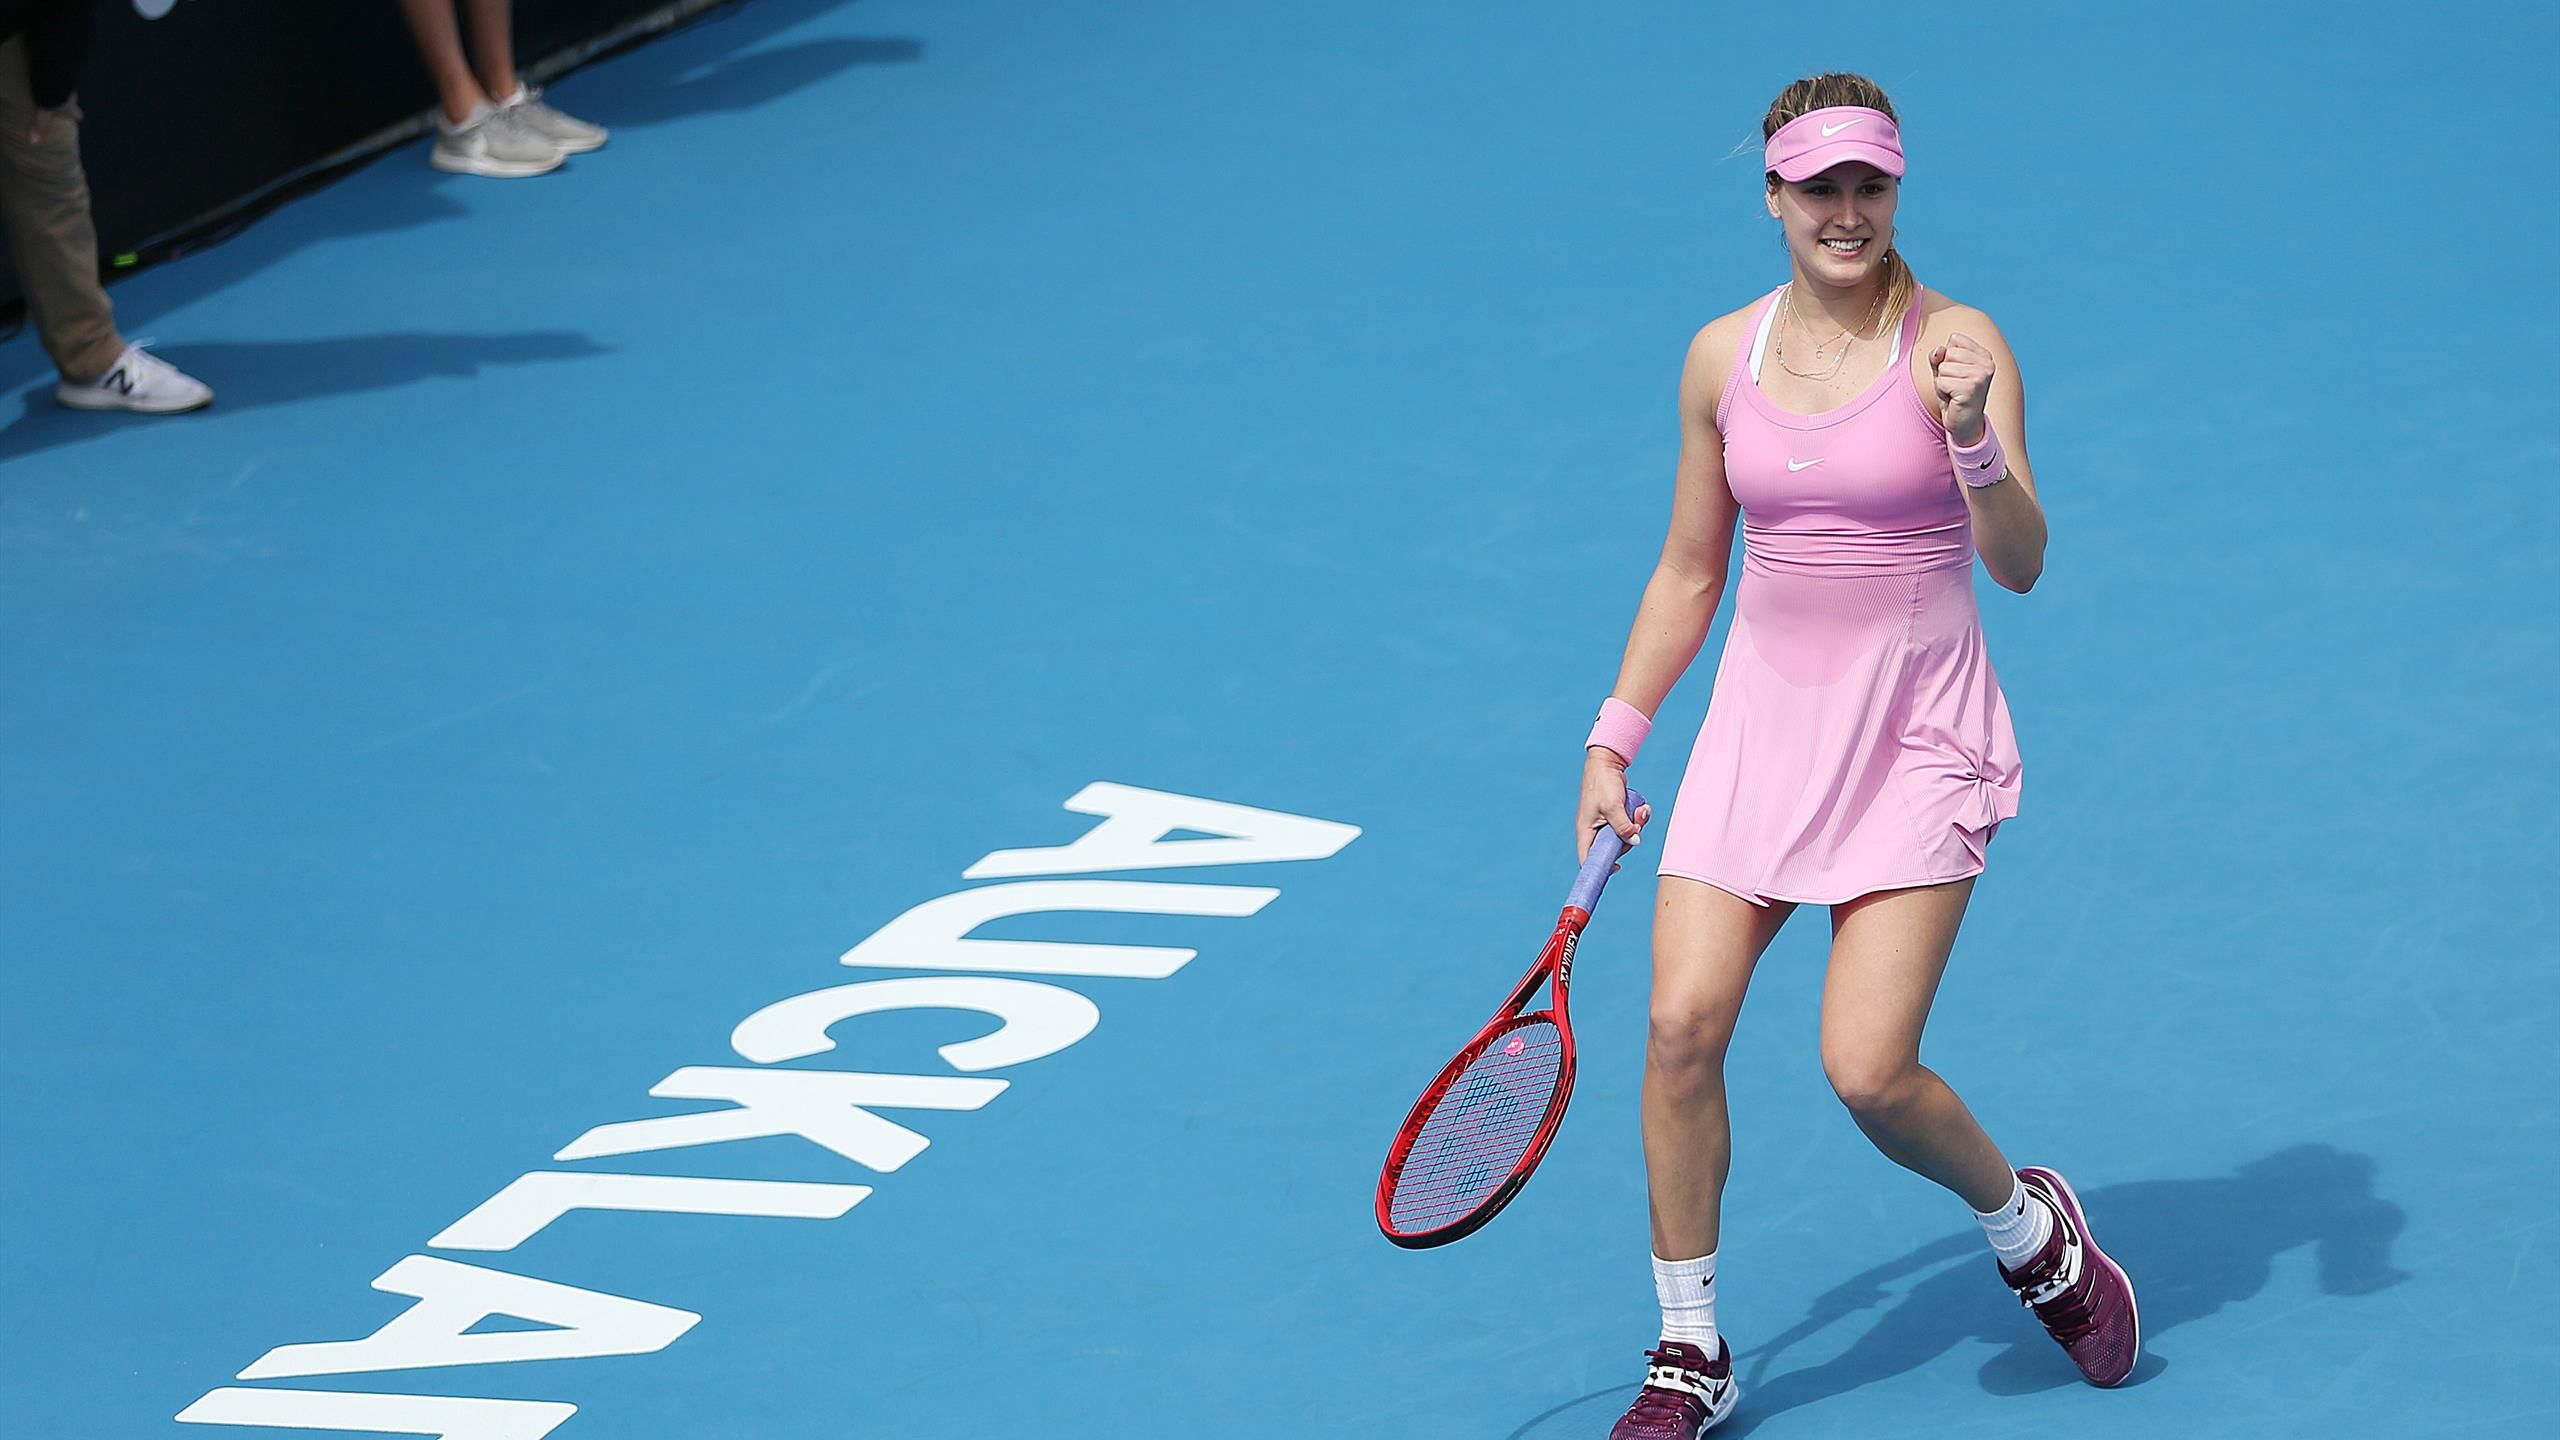 Tennis news - Eugenie Bouchard, Alize Cornet knock out seeds in WTA Auckland 